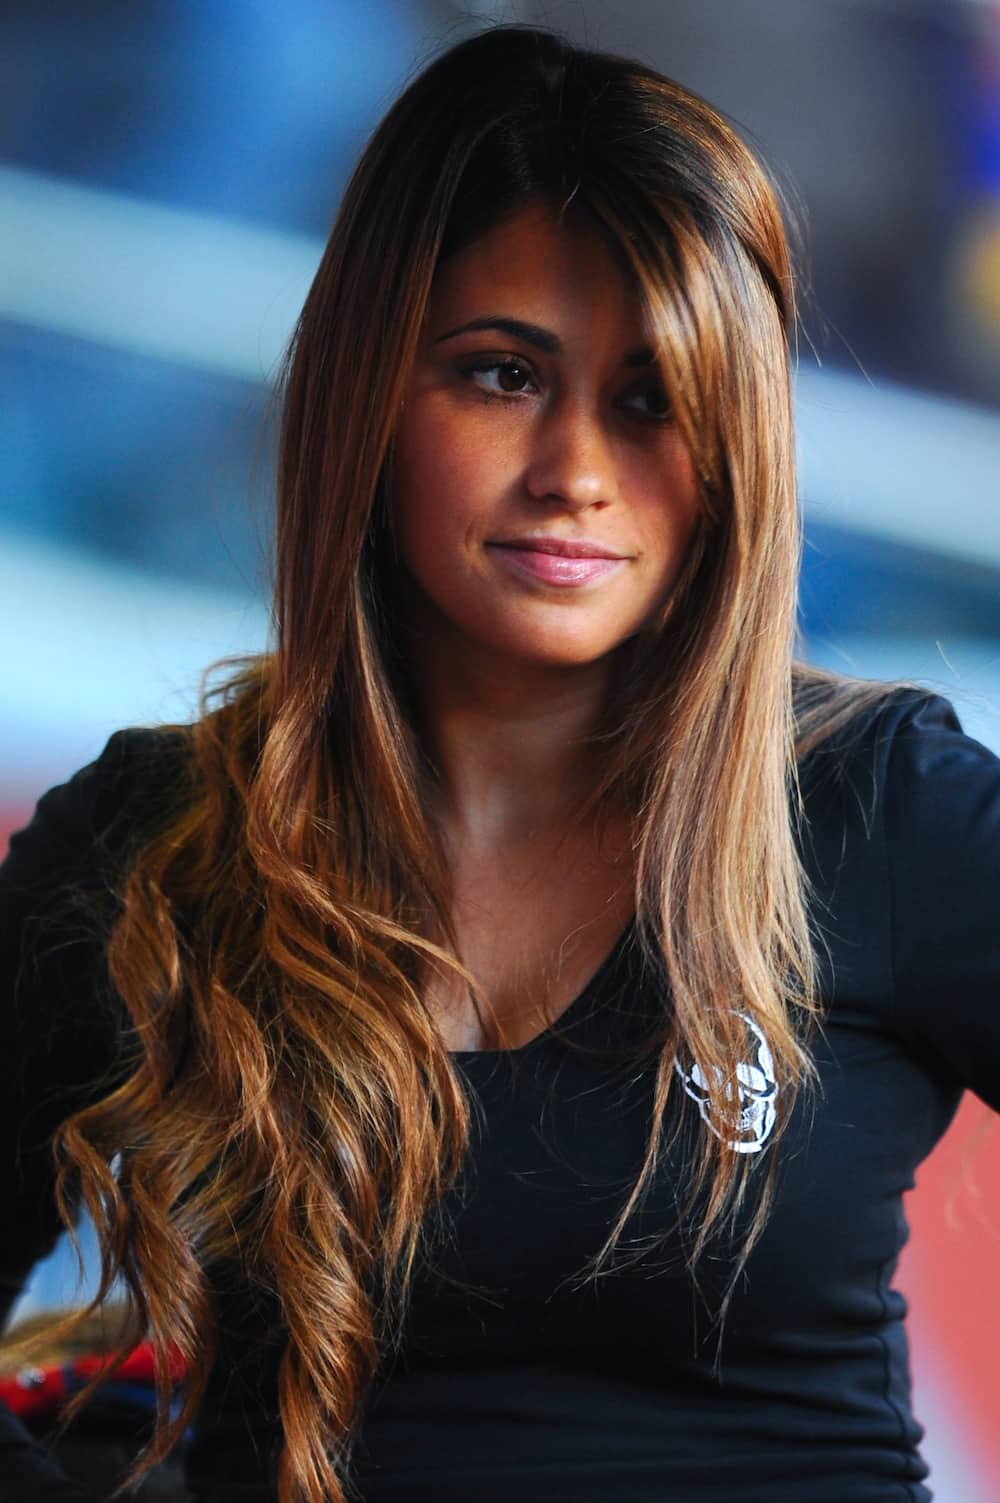 17 flawless photos of Lionel Messi’s georgeous girlfriend Antonella